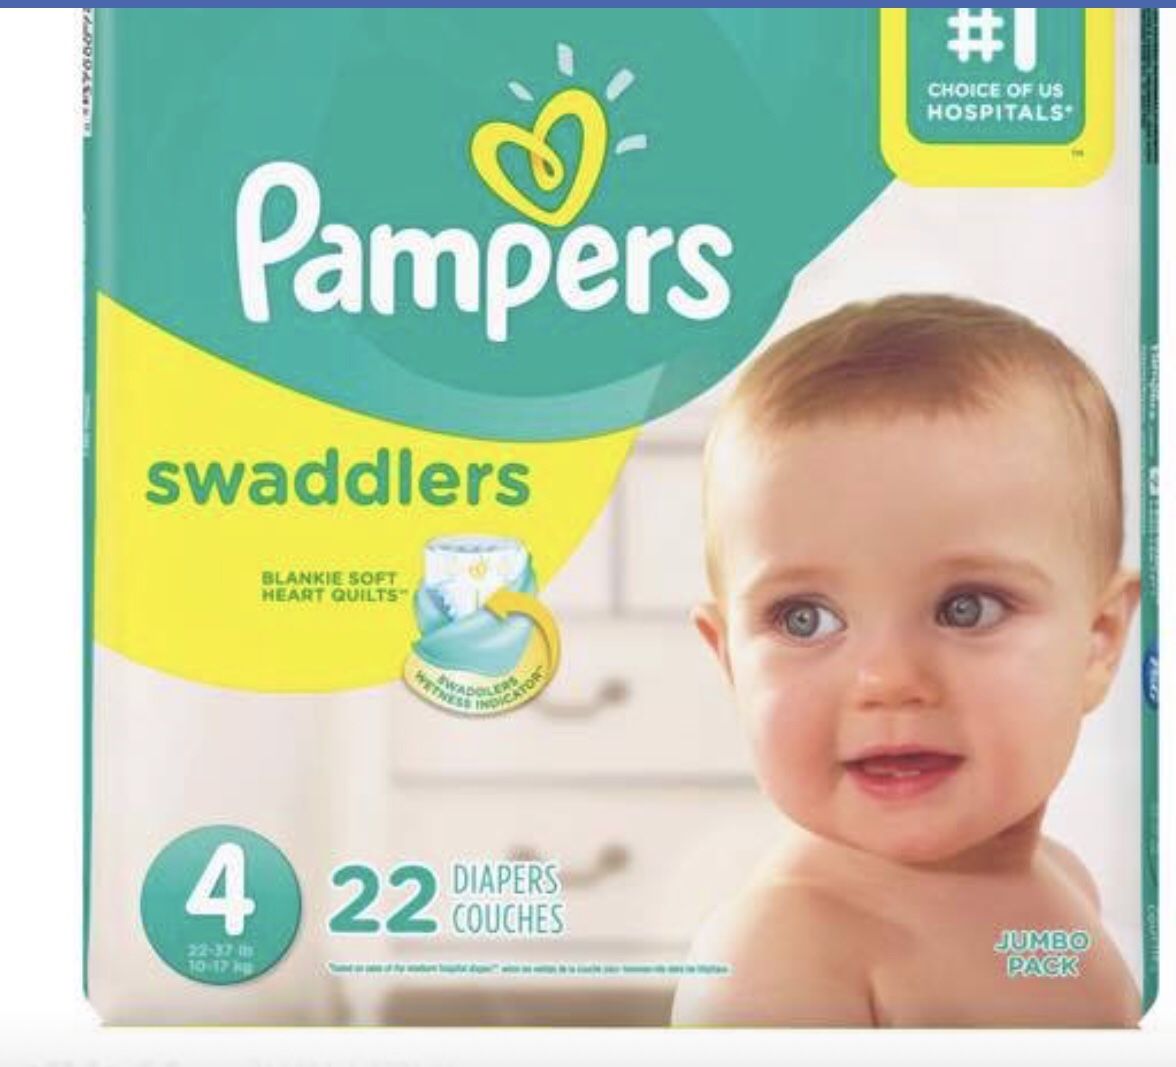 New pampers Swaddlers size 4. I have 14 left at $5 each